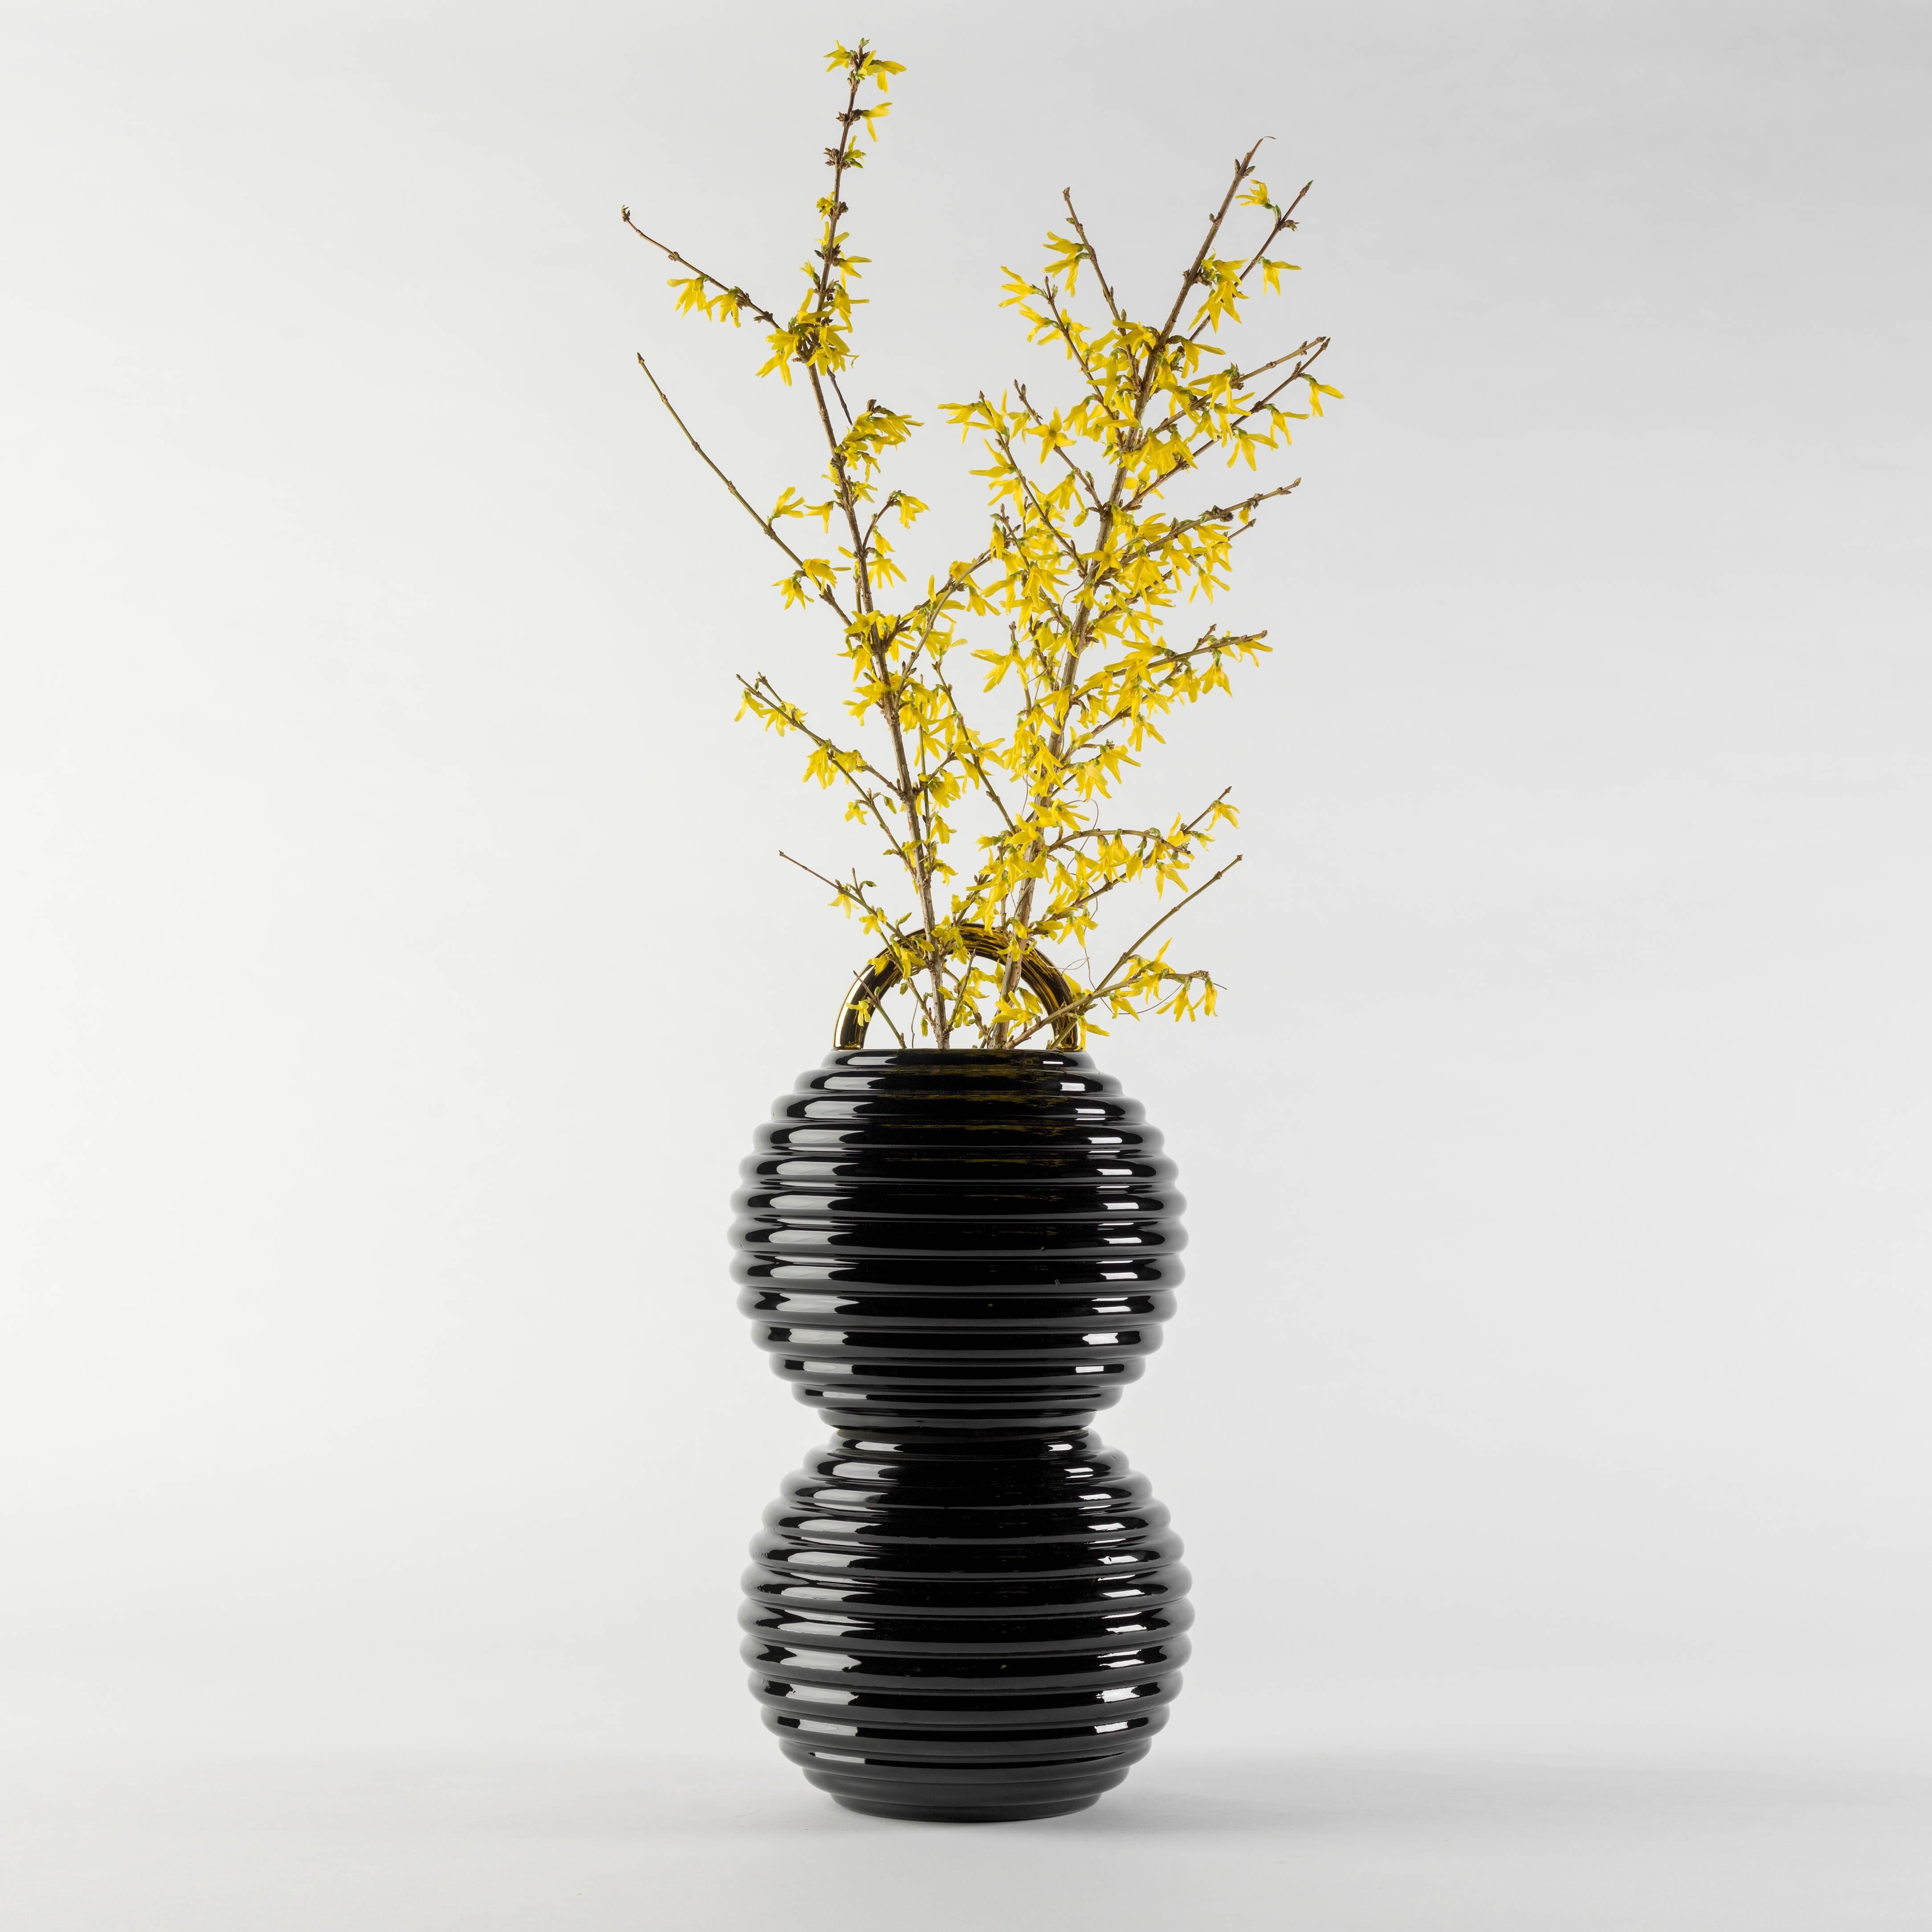 White or black enamelled ceramic vases with hand painted decorations in gold, platinum and copper.

The Grasso vases come in different finishes. The basic versions are either all in white or black with the handle painted in gold. There are also